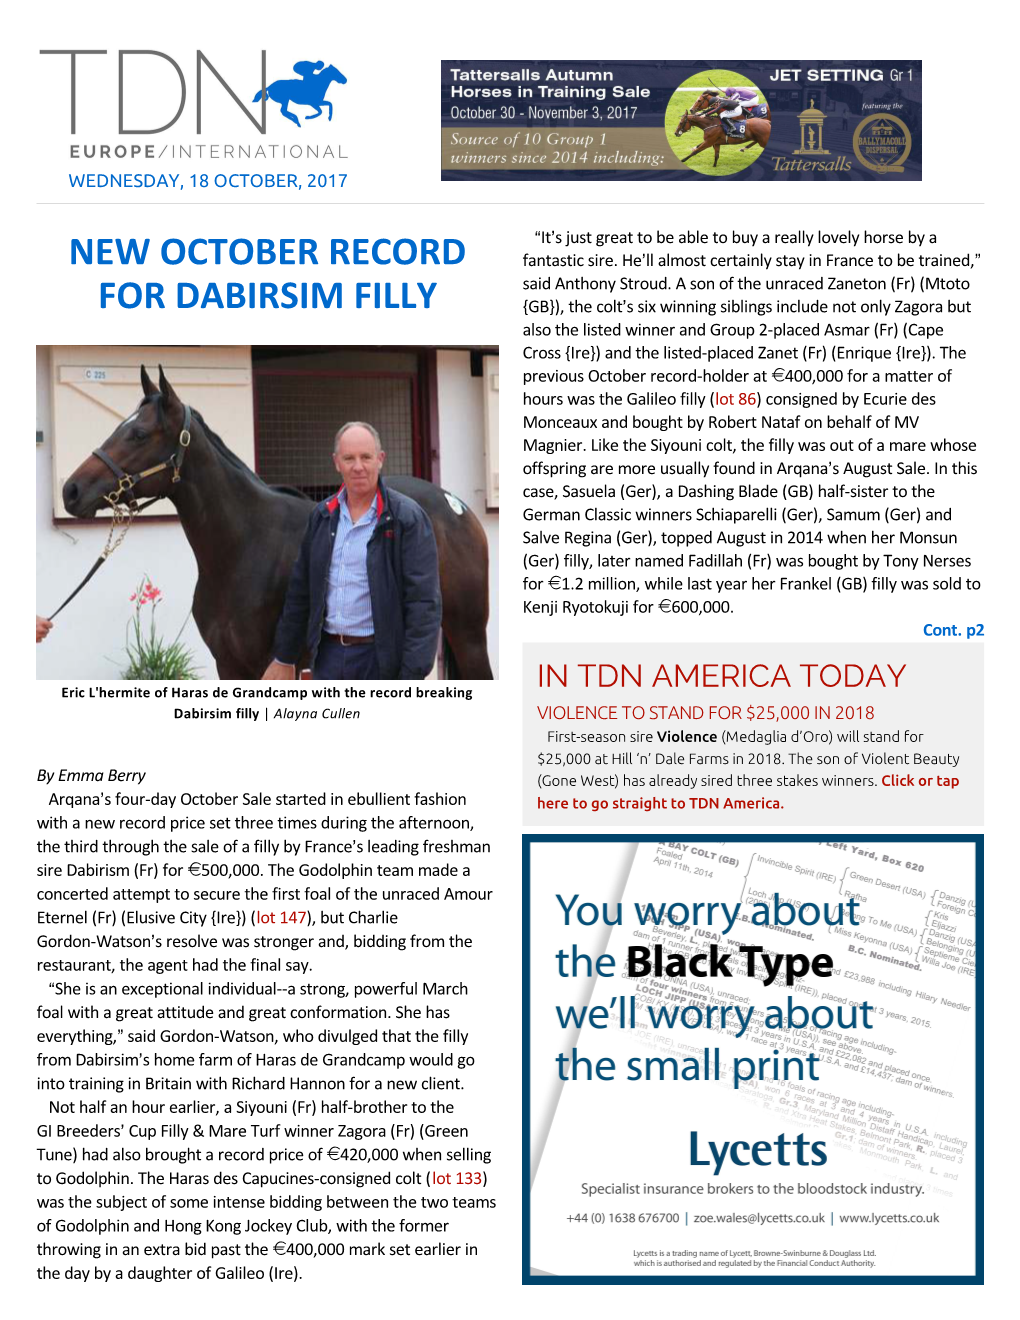 New October Record for Dabirsim Filly Cont